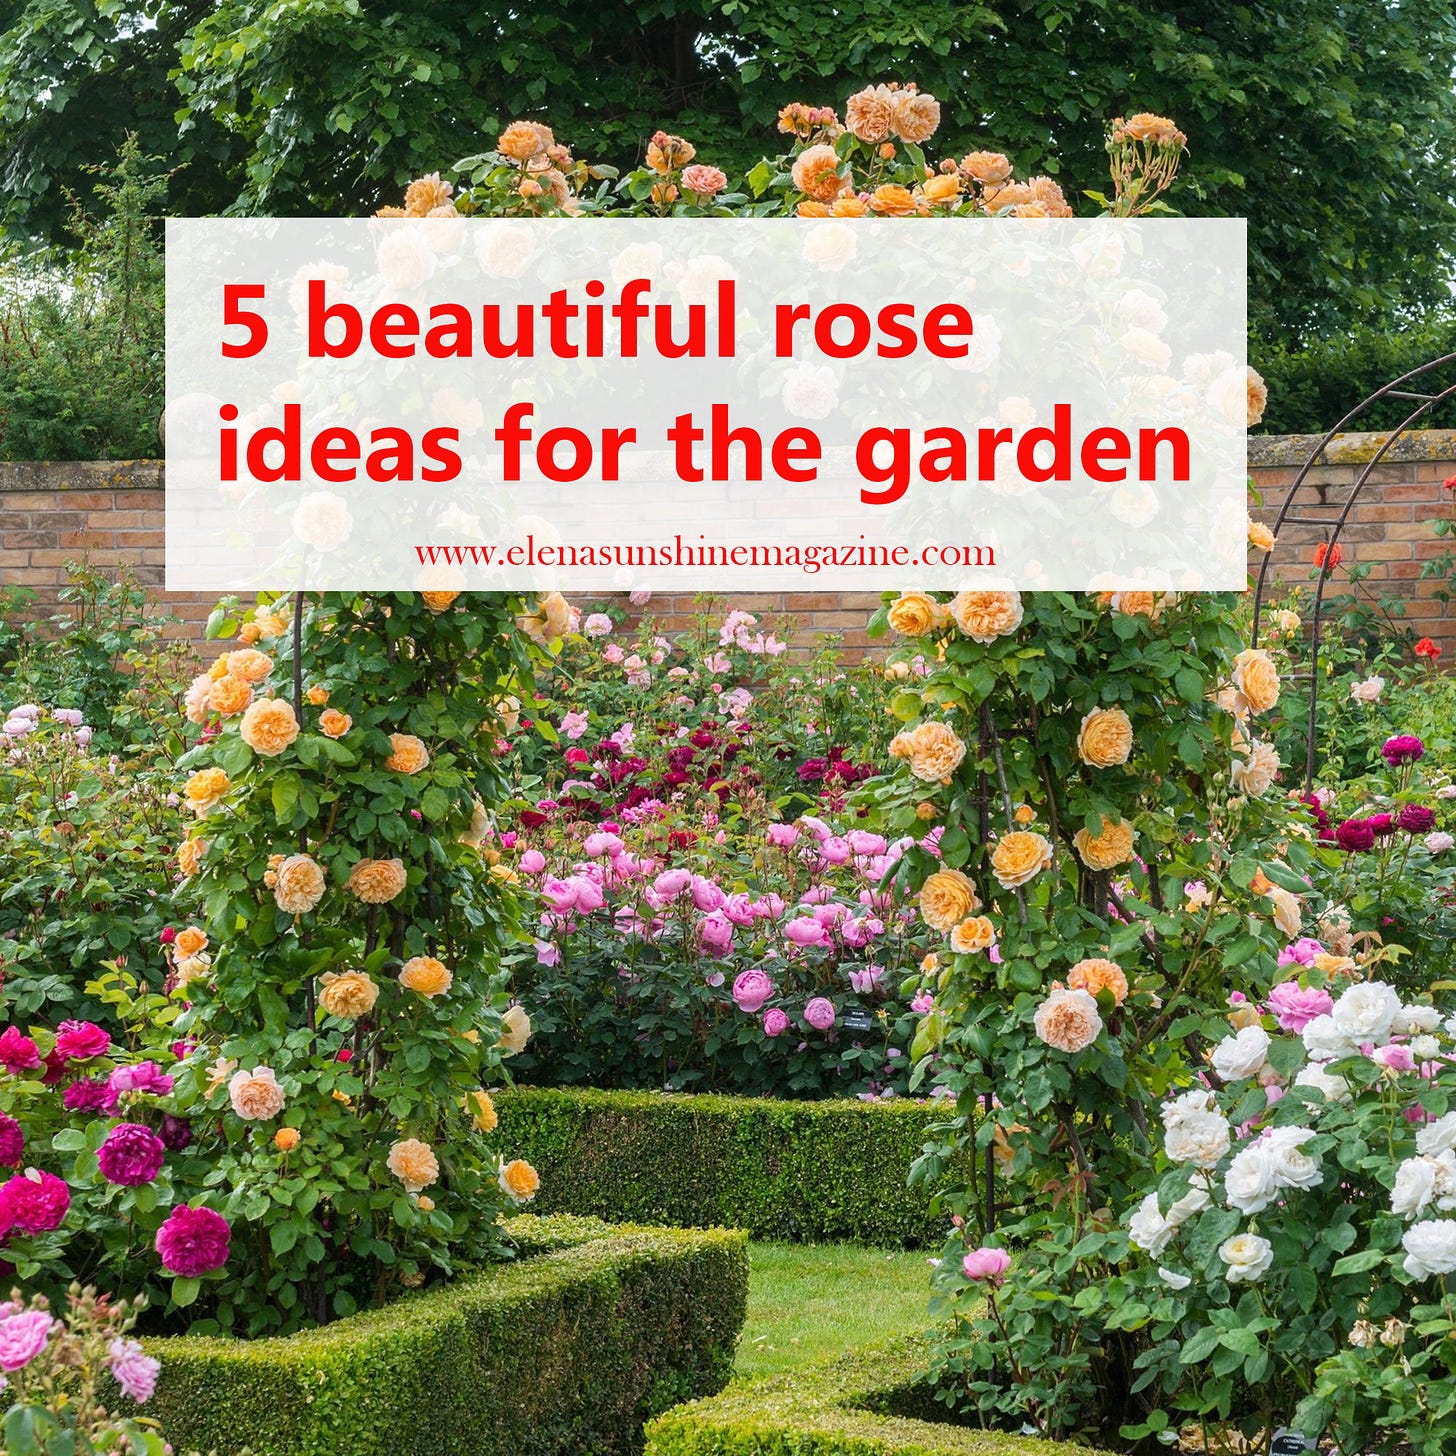 5 beautiful rose ideas for the garden